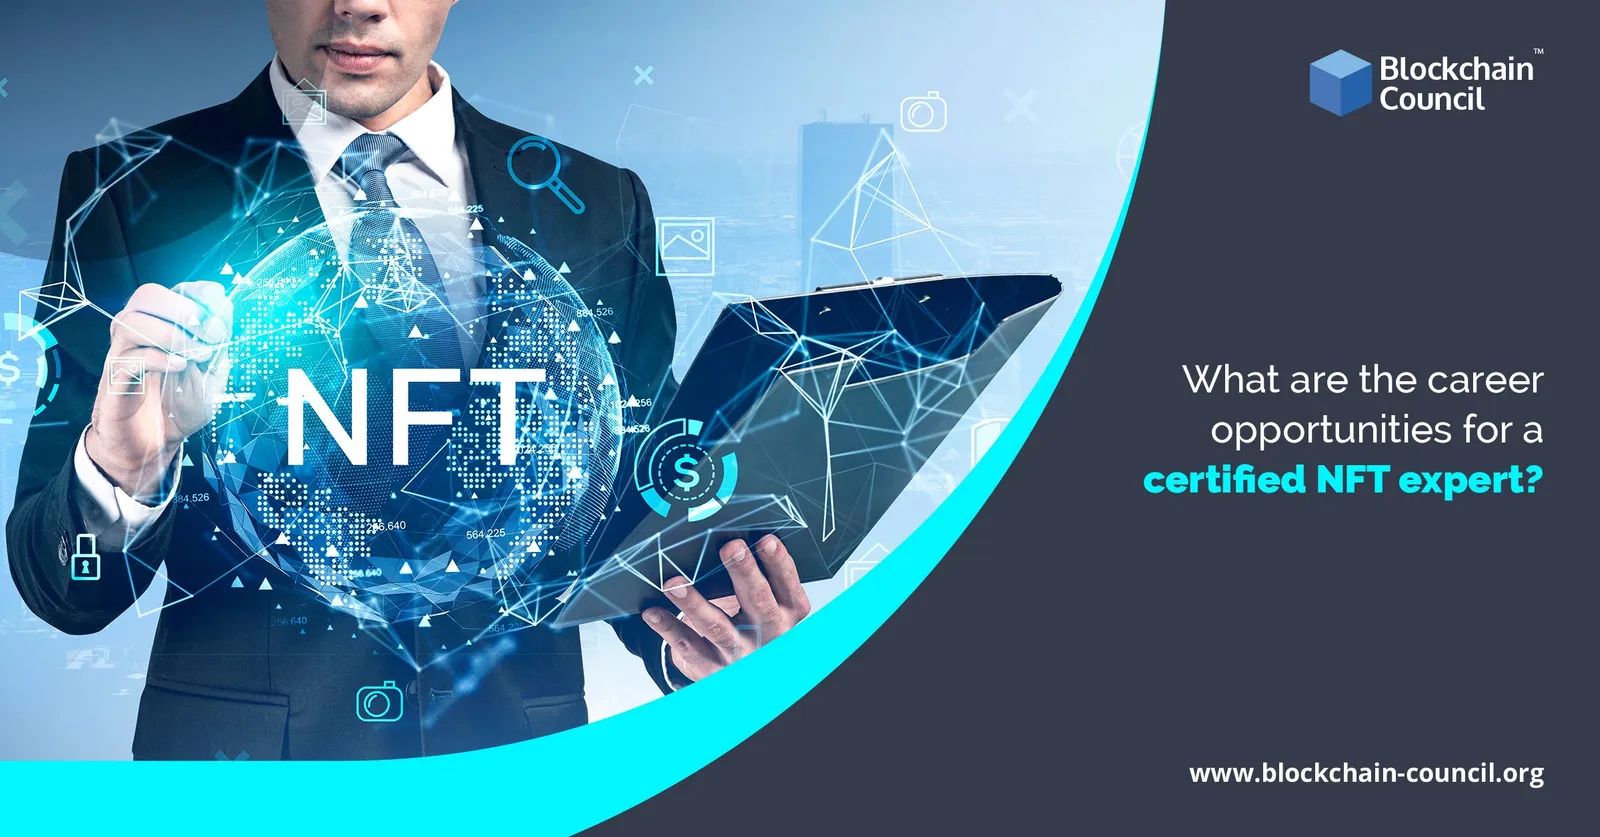 What are the career opportunities for a certified NFT expert?